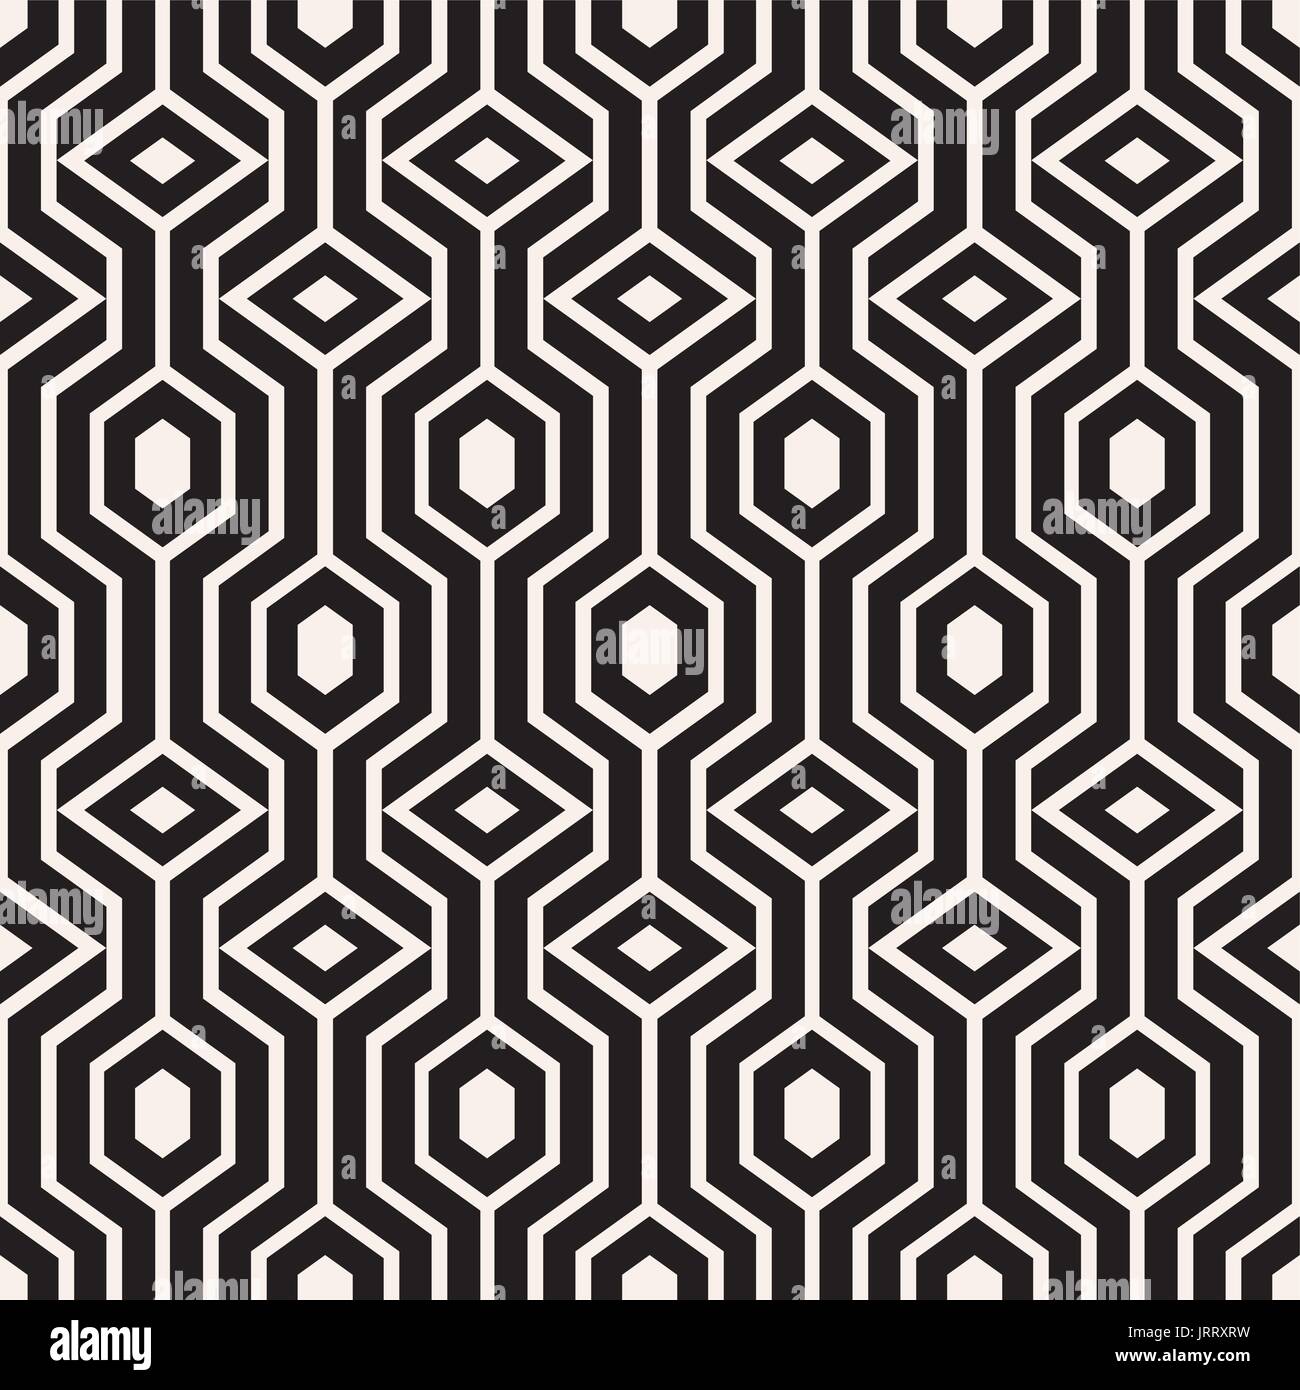 Abstract vector seamless pattern with hexagons and rhombuses. Repeating geometric  black and white endless texture can be used for textile, gift wrap, Stock Vector